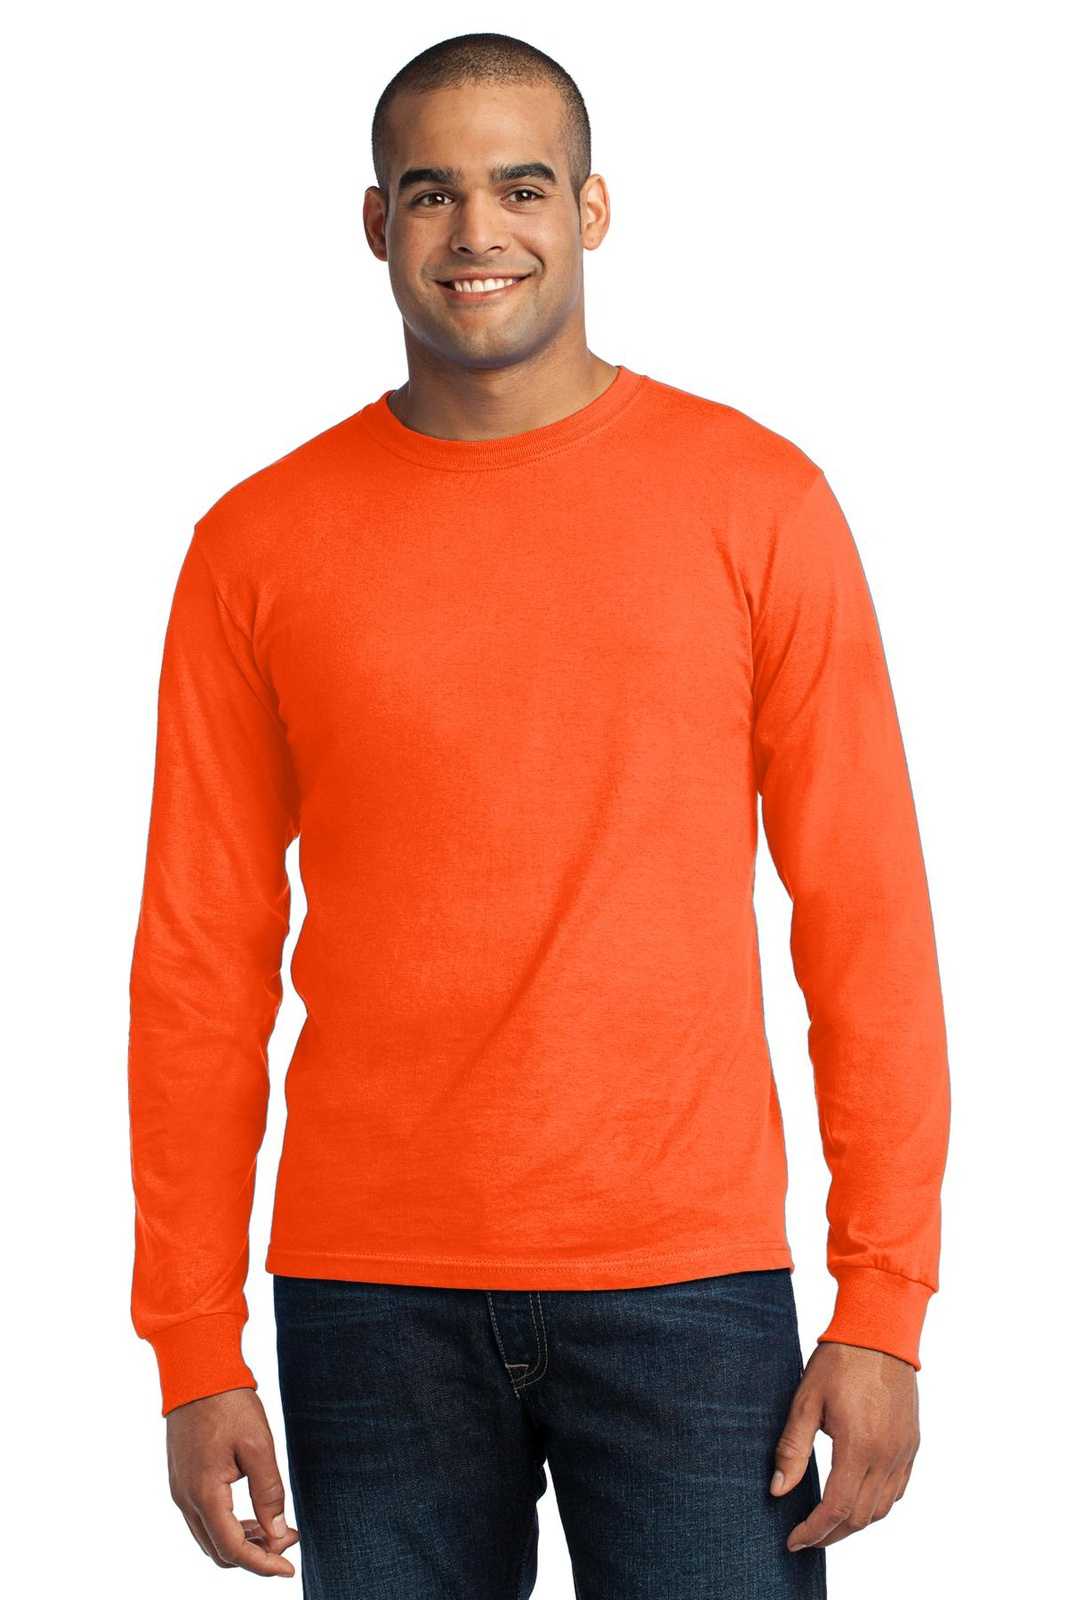 Port & Company USA100LS Long Sleeve All-American Tee - Safety Orange - HIT a Double - 1